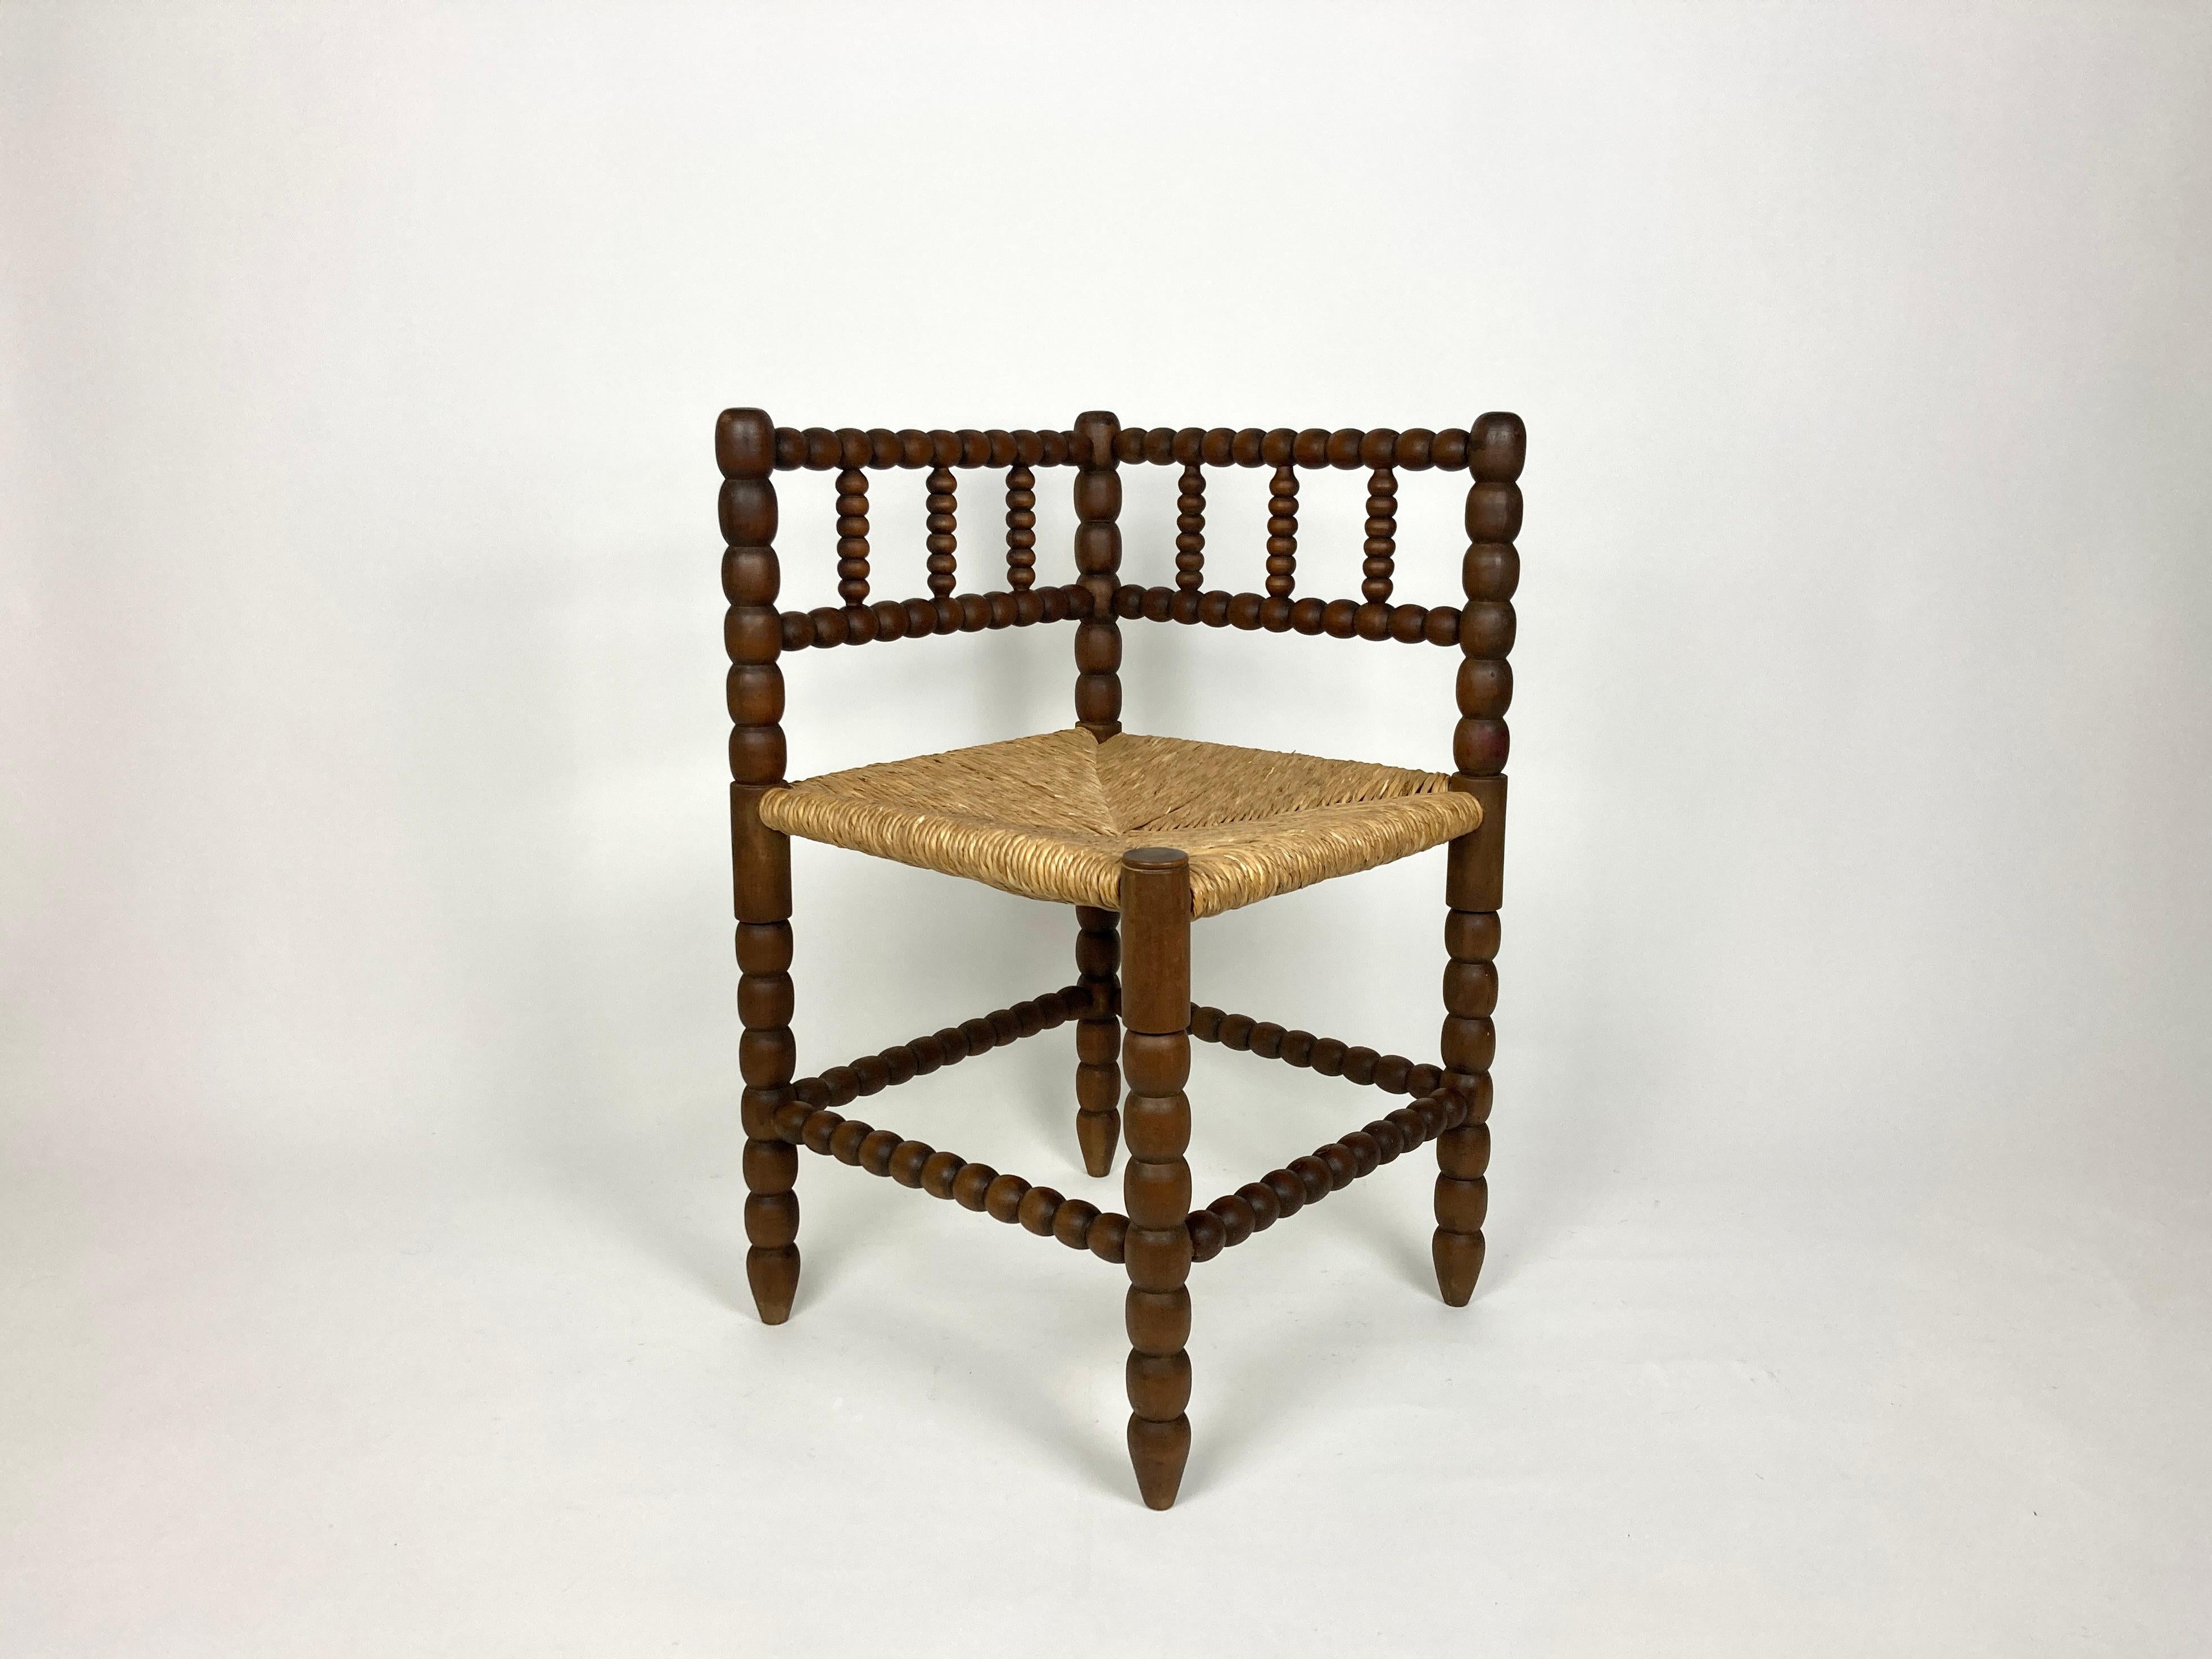 Early European (probably Dutch) 20th century oak bobbin turned corner chair with rush seat.

Excellent condition, all original, no old repairs or modifications.